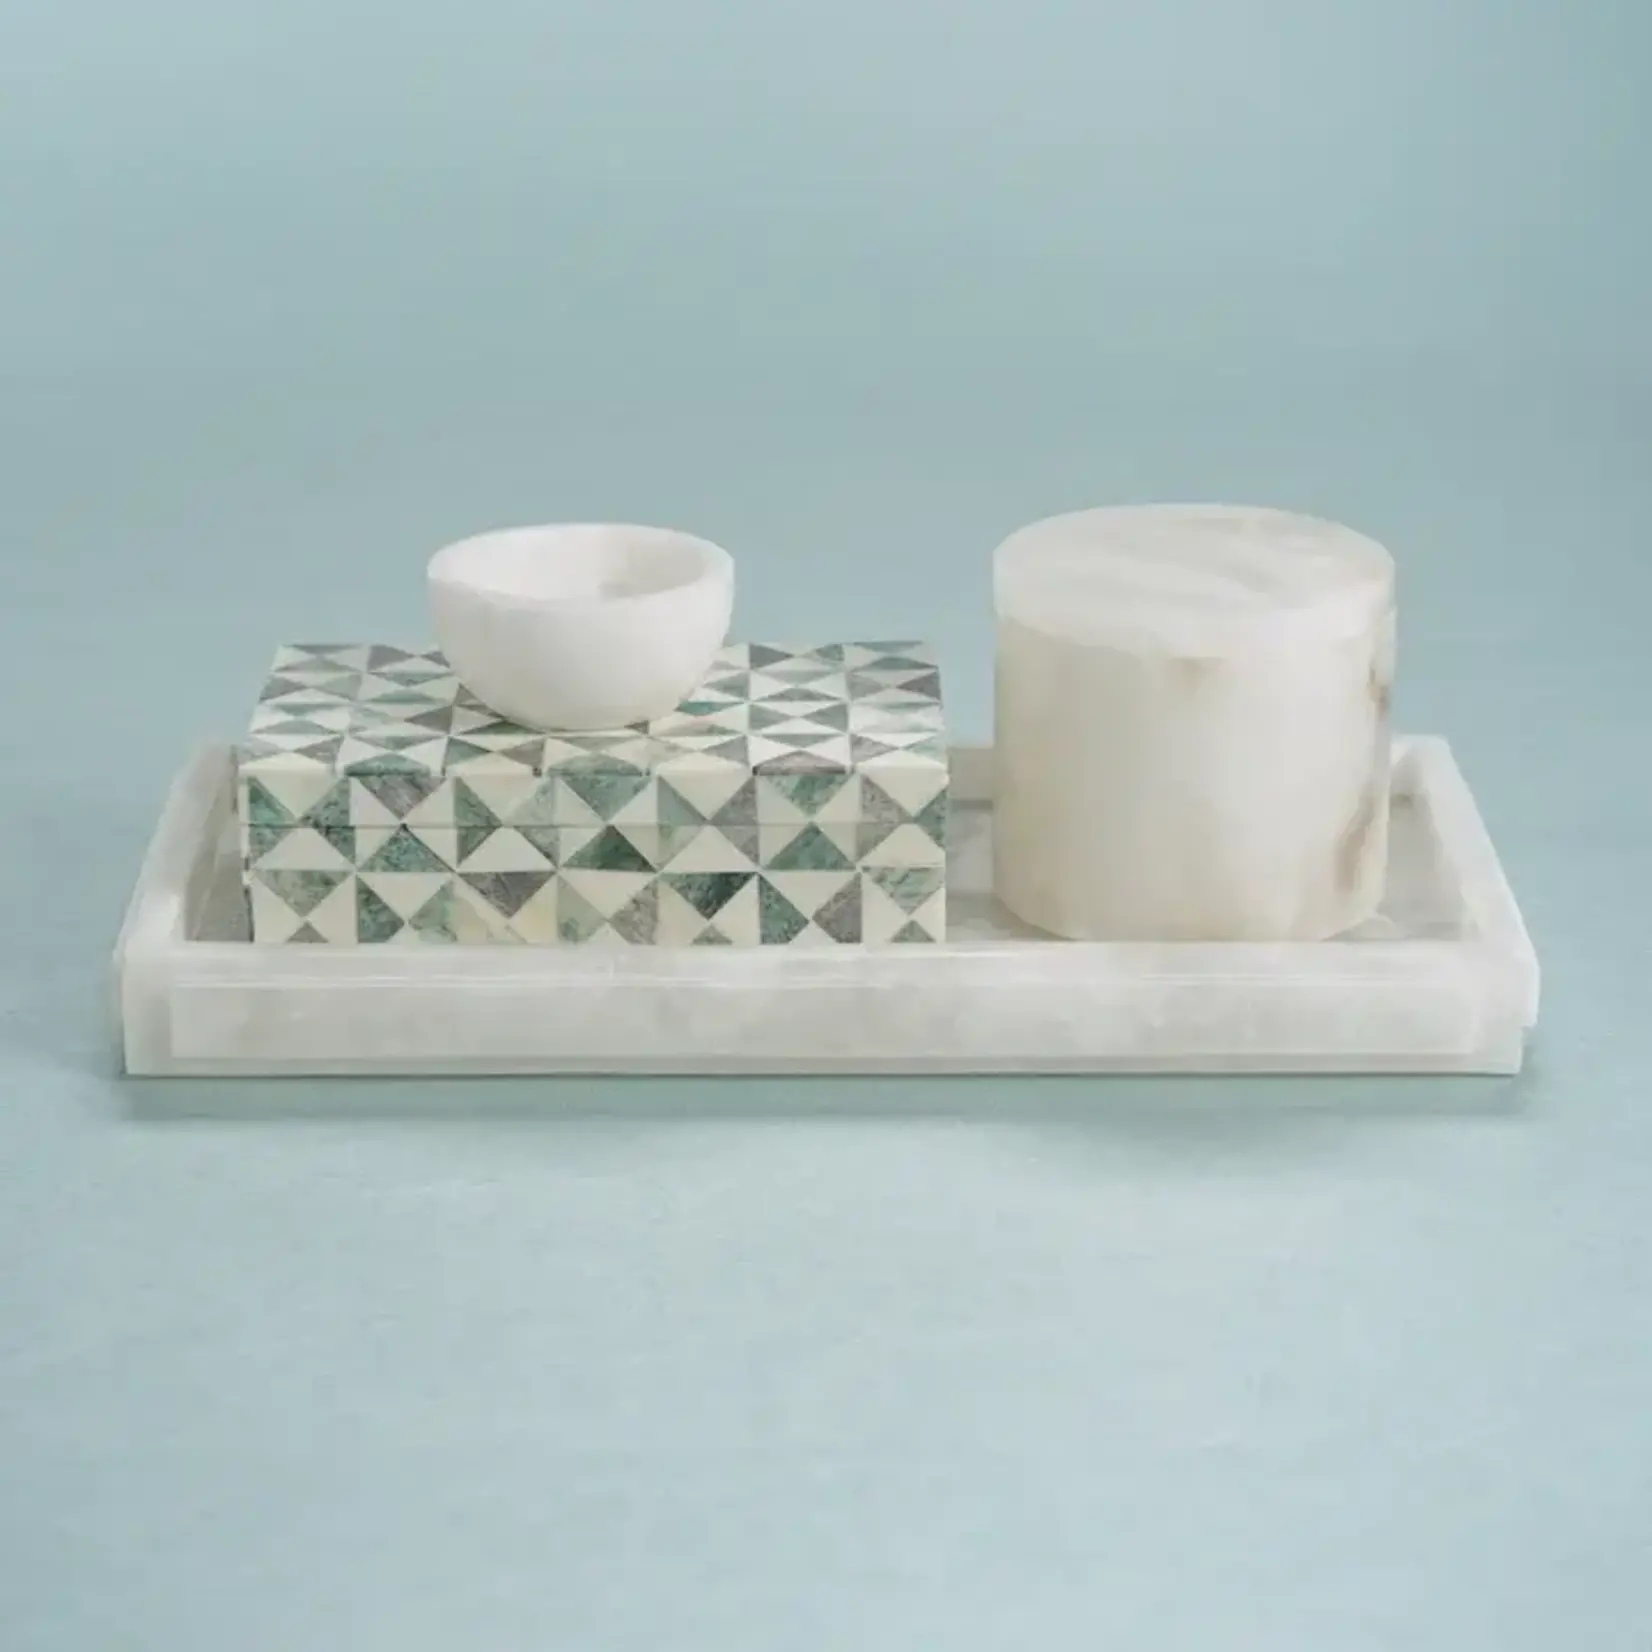 Outside The Box 14 x 7 Cote D'Azur White Alabaster Vanity Tray